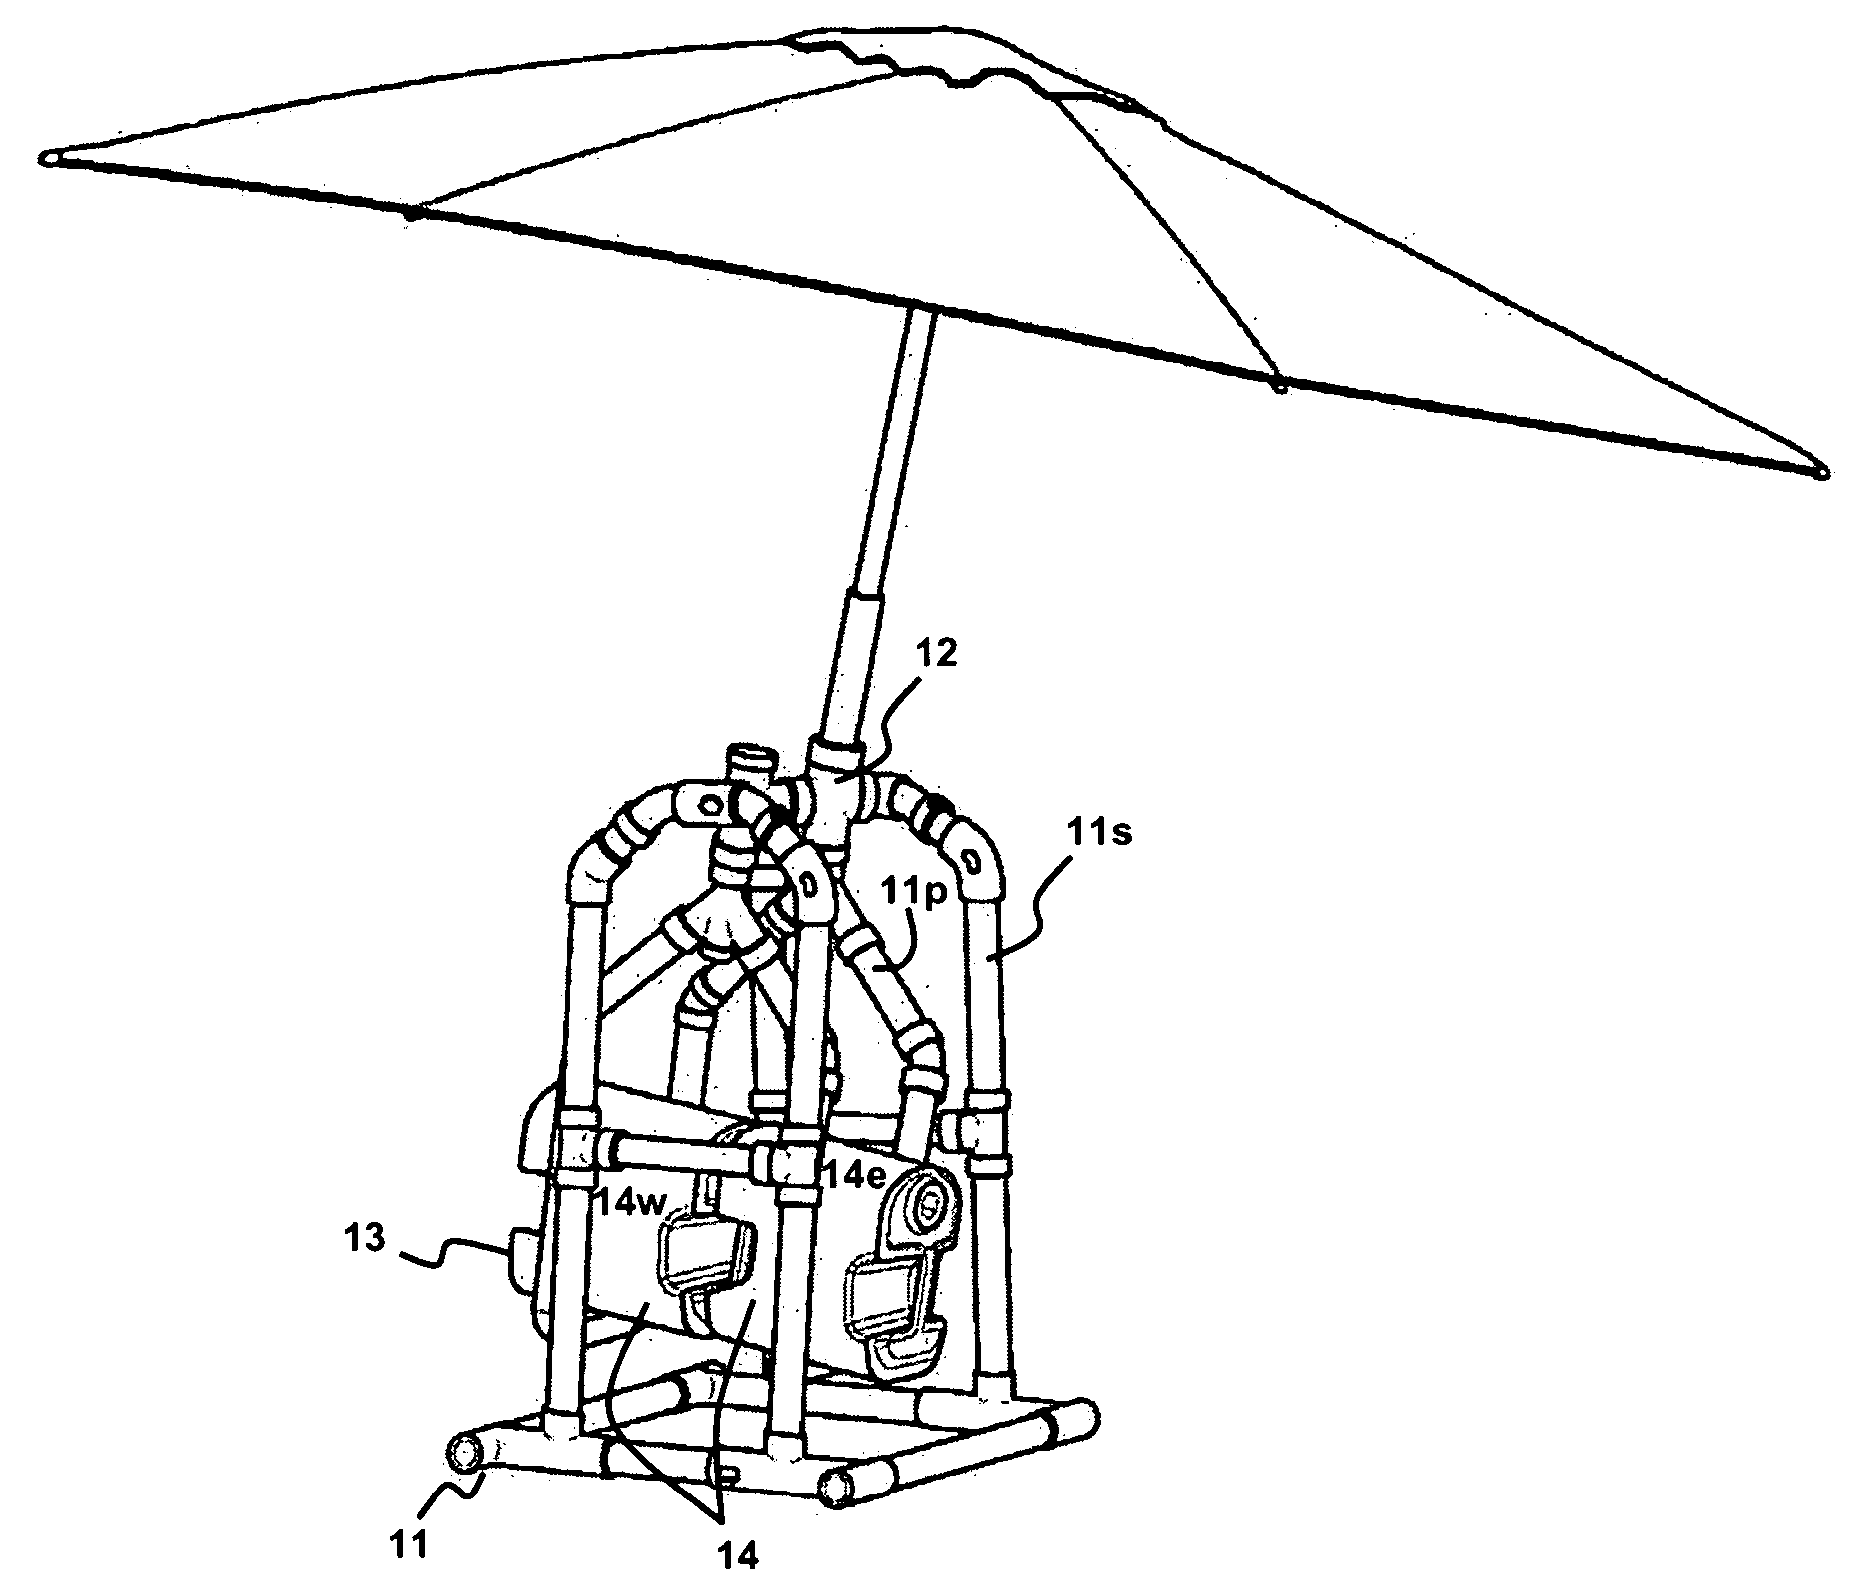 Apparatus for automated movement of an umbrella